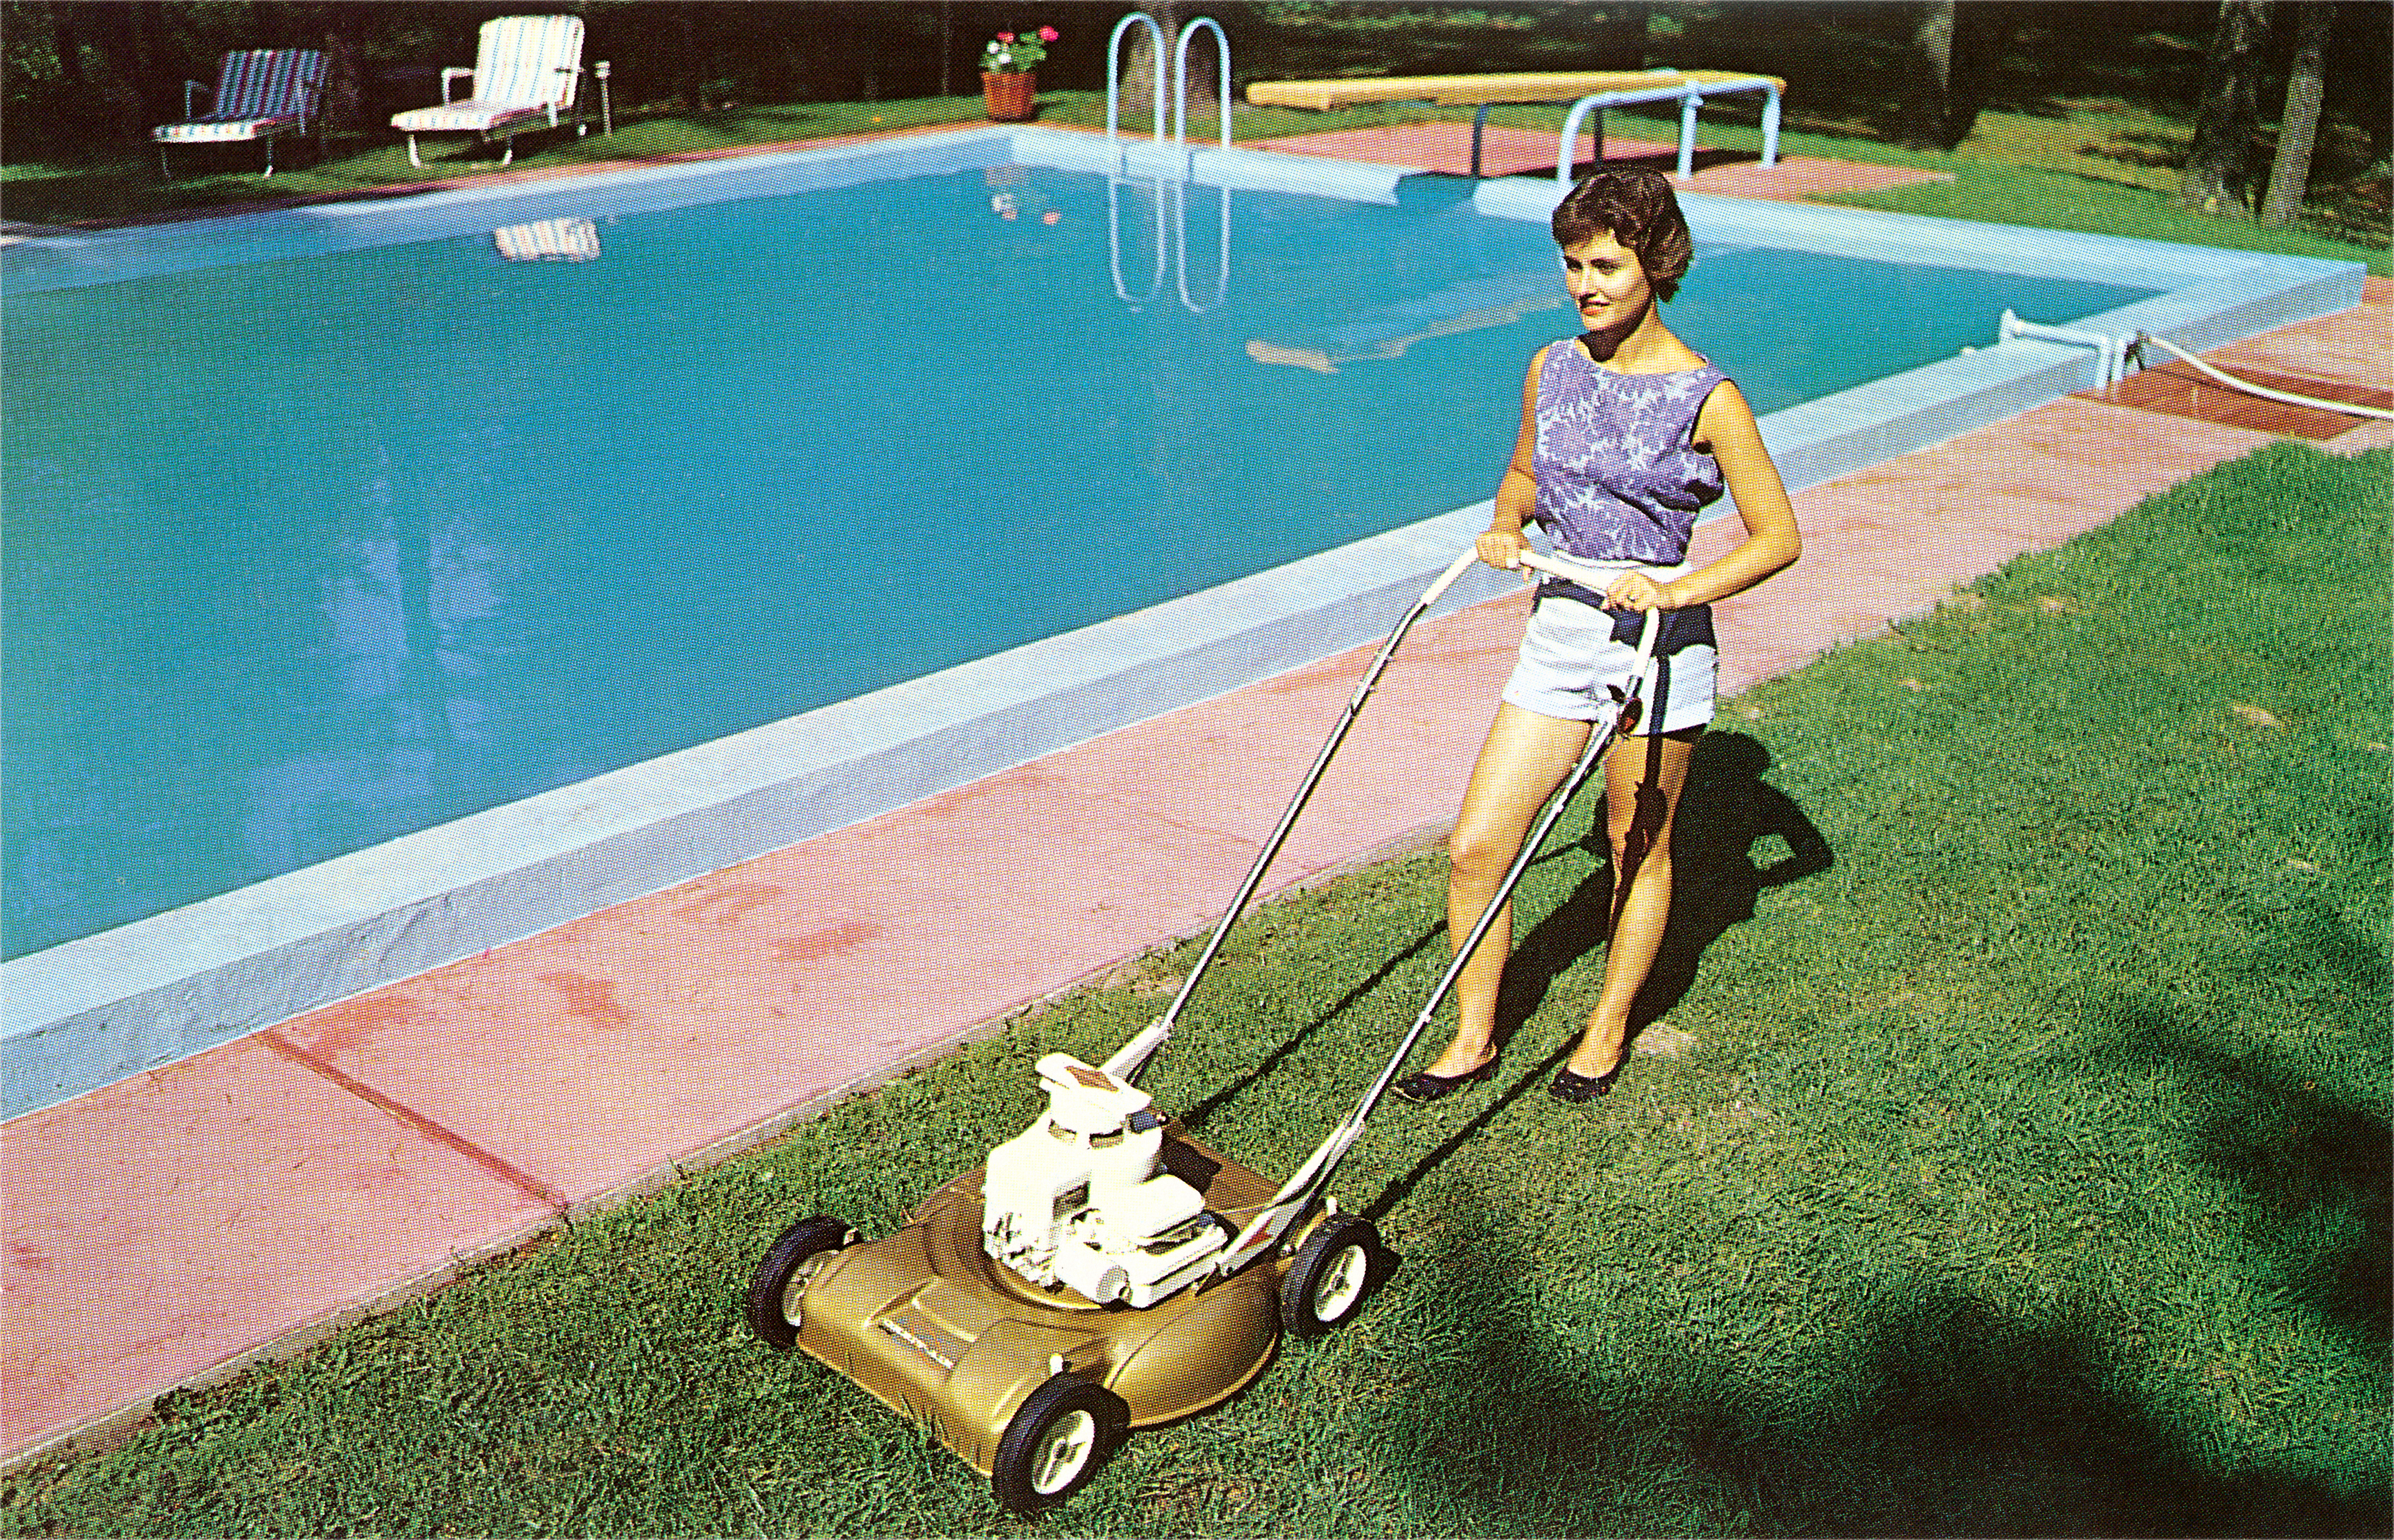 Vintage photograph of a woman in shorts and a sleeveless blouse pushing a gas powered lawn mover in a suburban backyard next to a swimming pool. in the 1950s. (Photo by Found Image Holdings/Corbis via Getty Images)